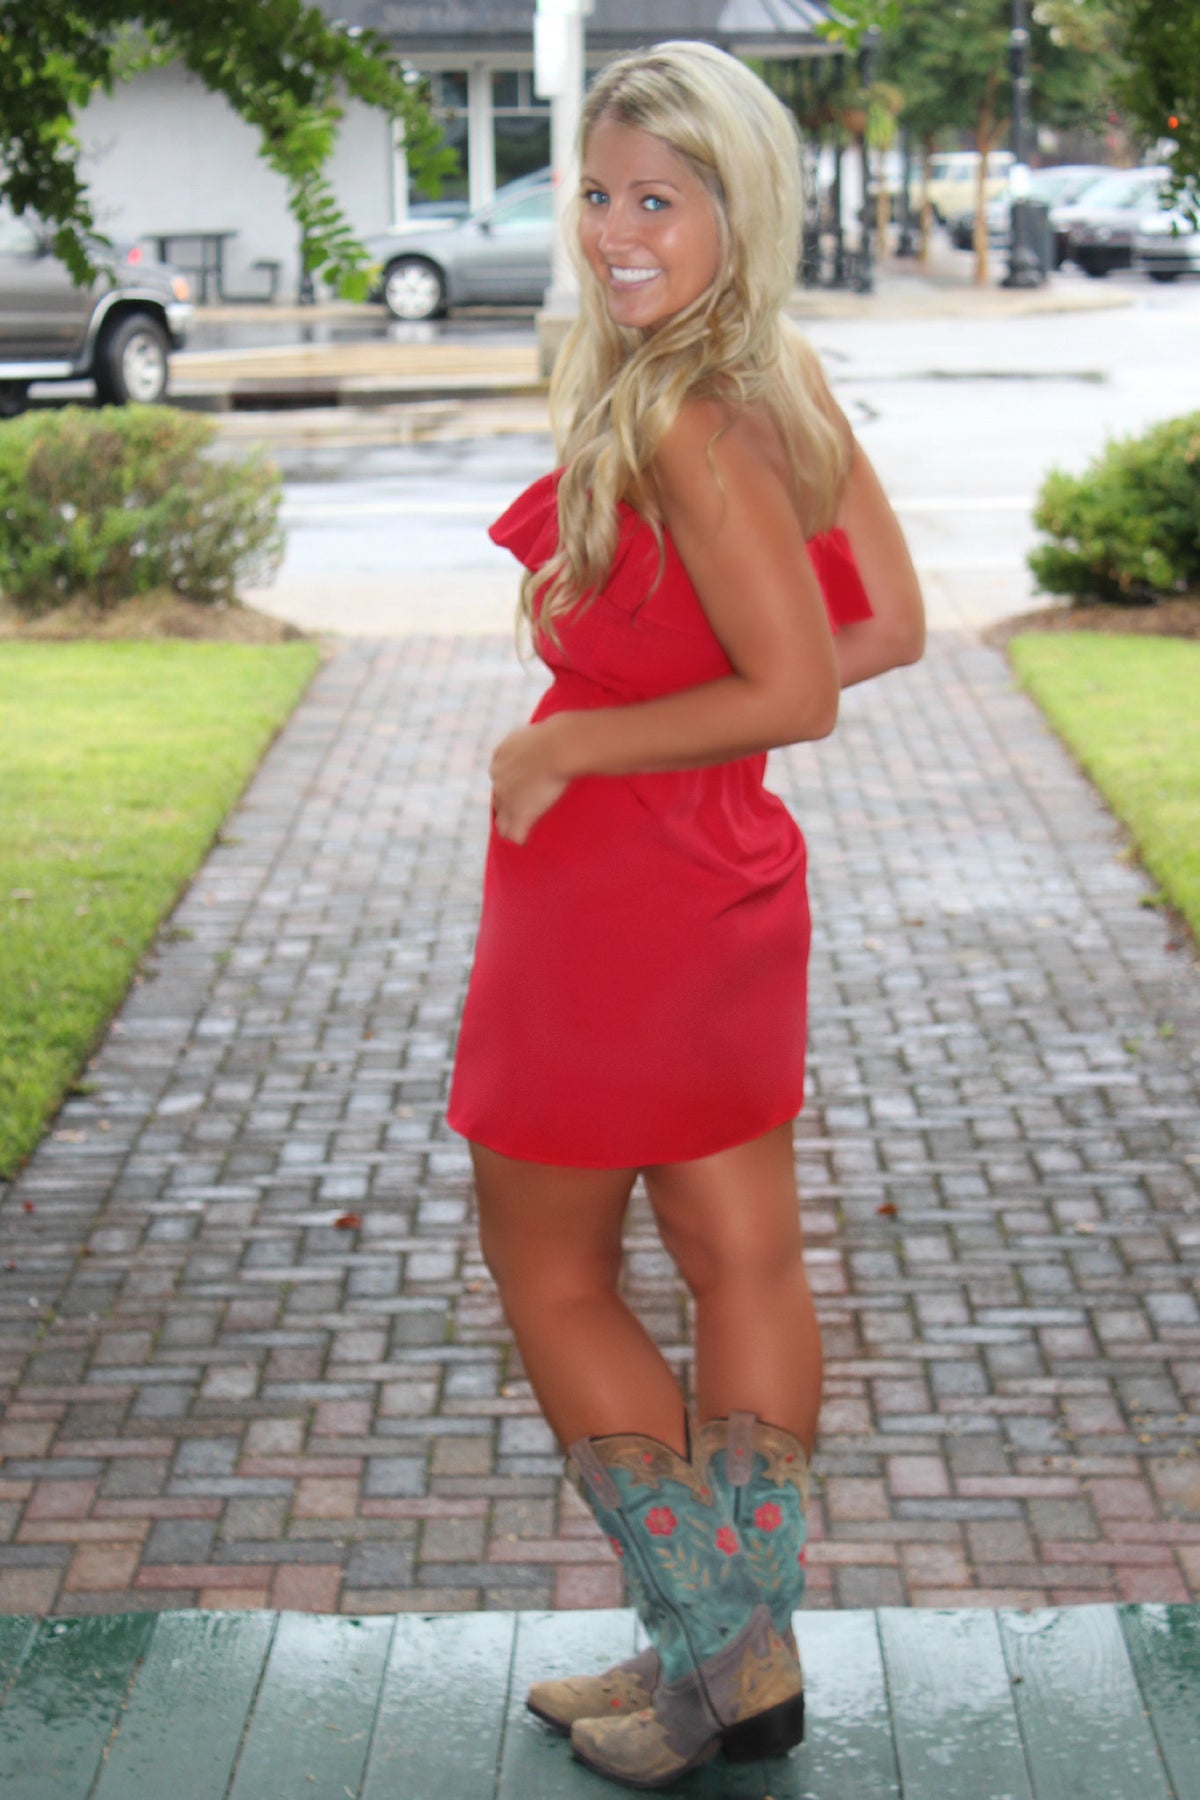 Glam: Lilly Dress, Red